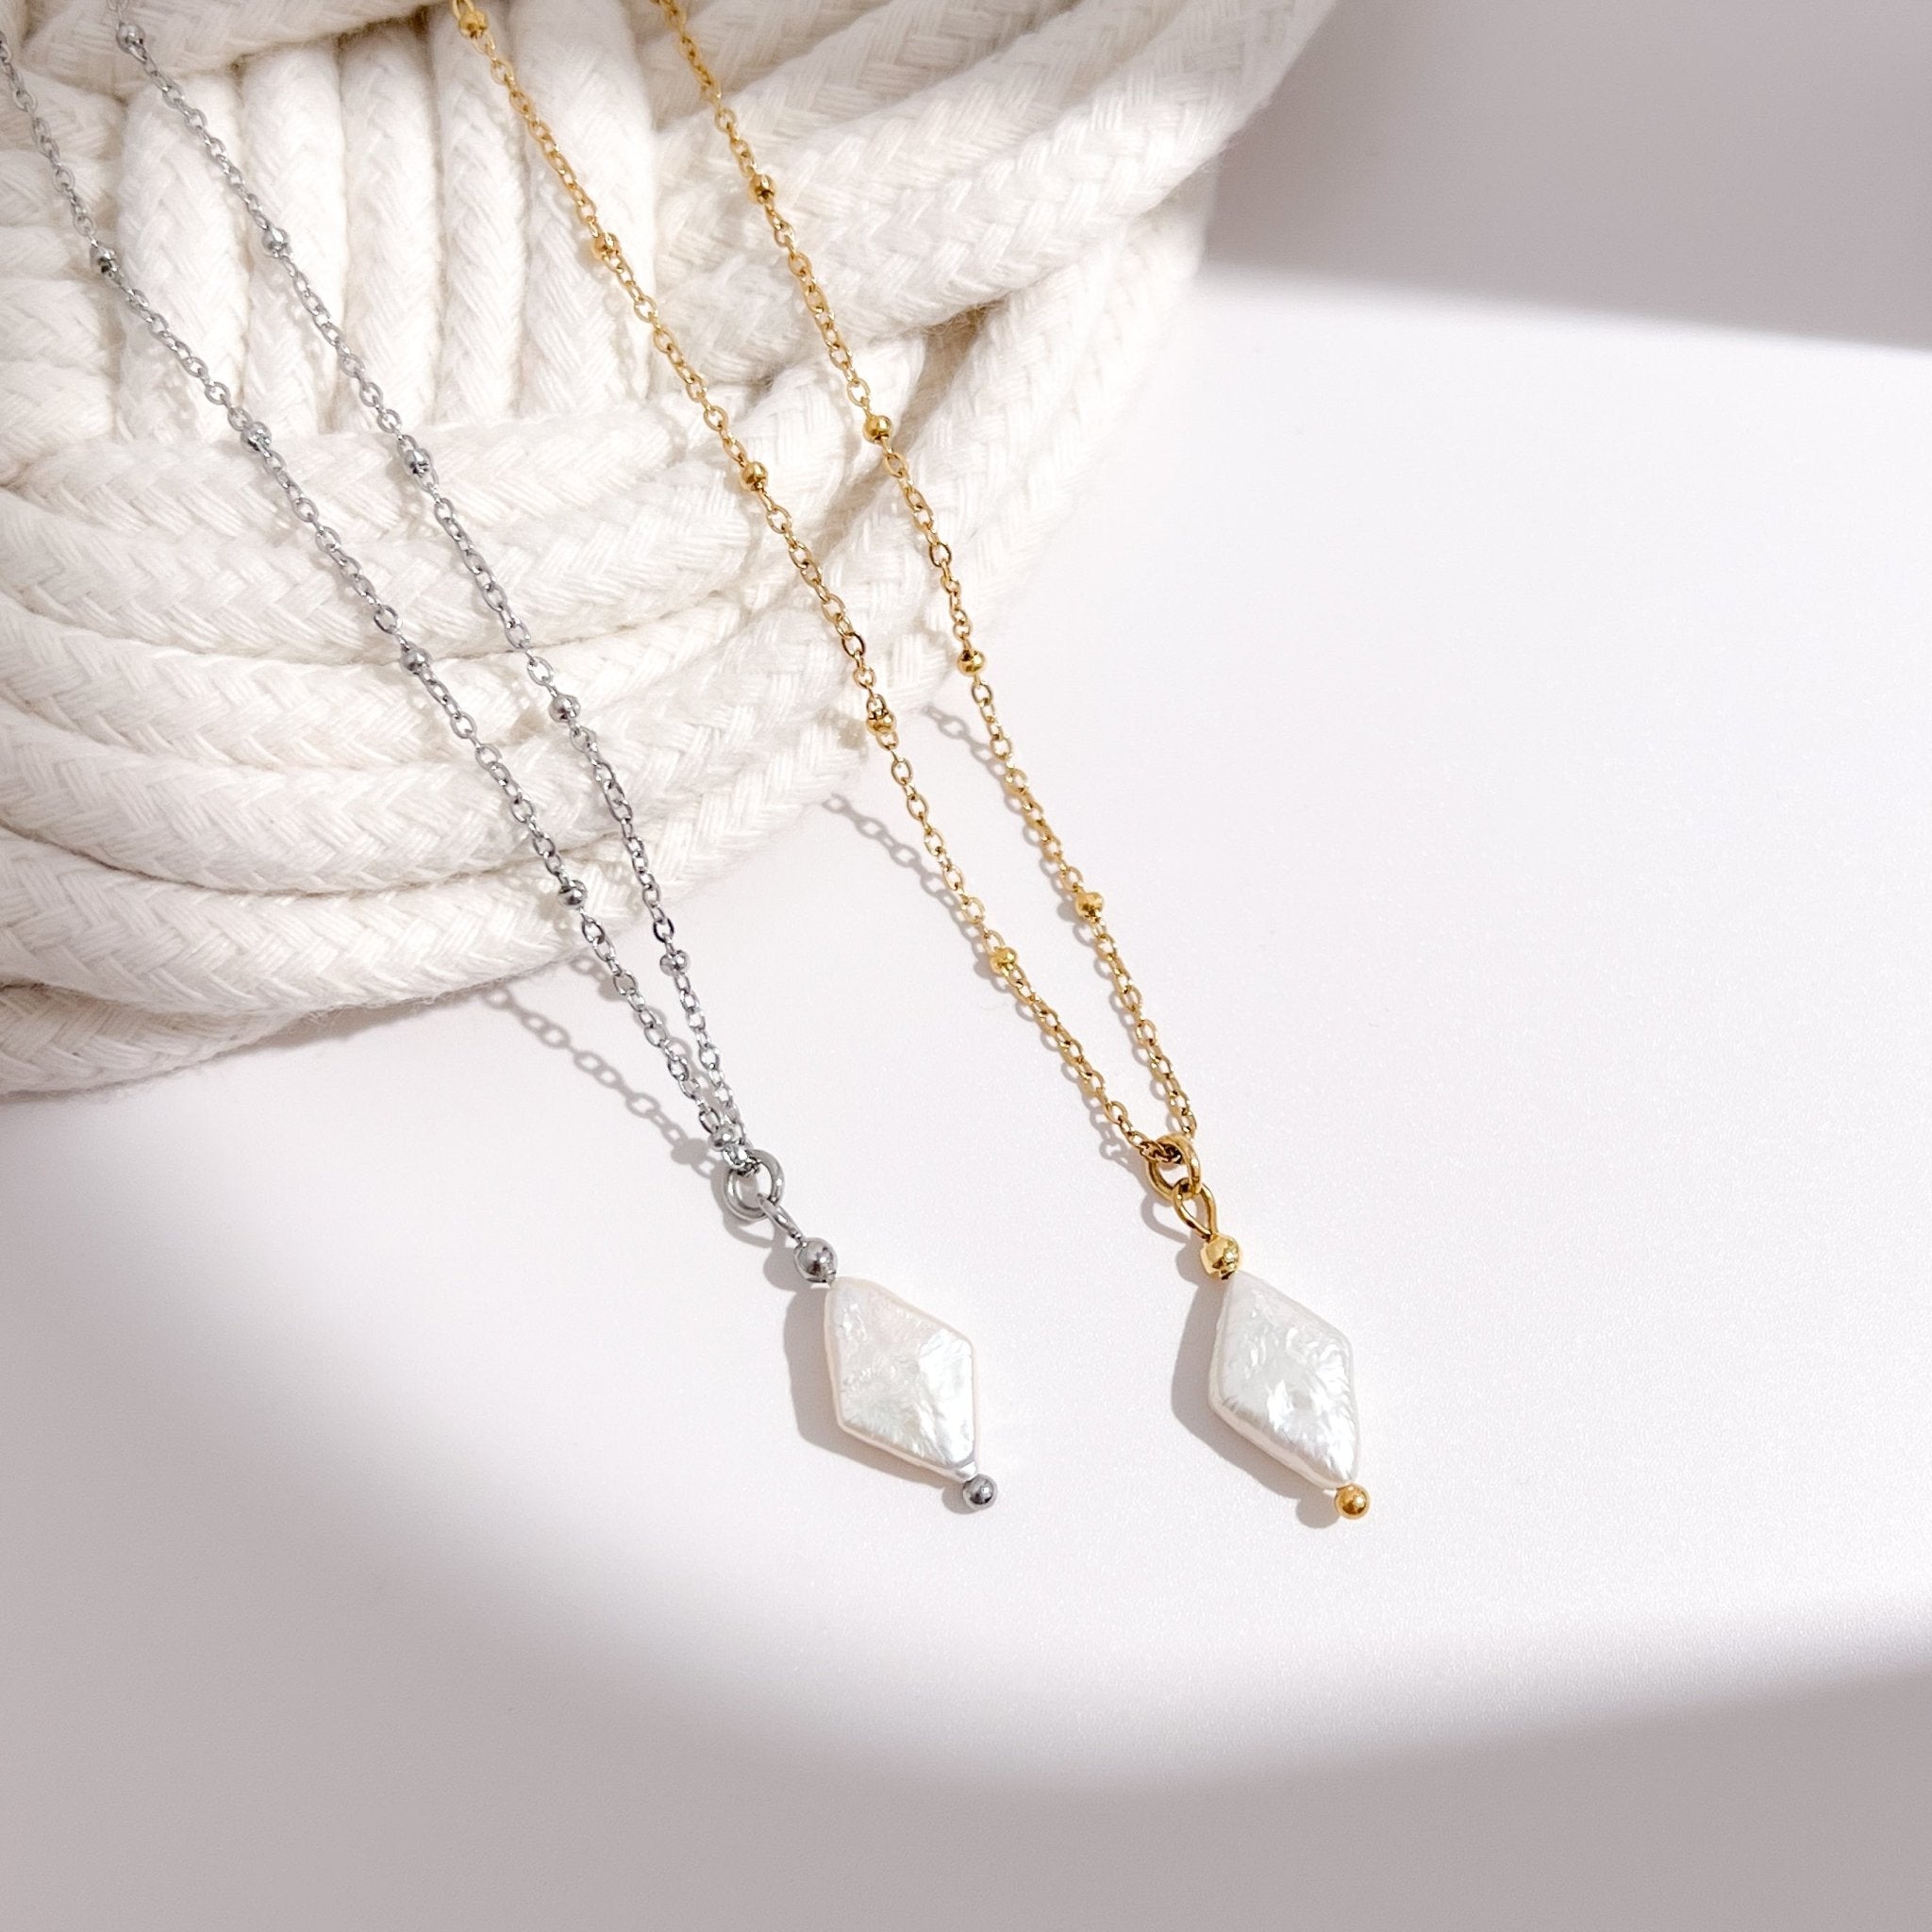 Iris Pearl Necklaces - Flaire & Co.